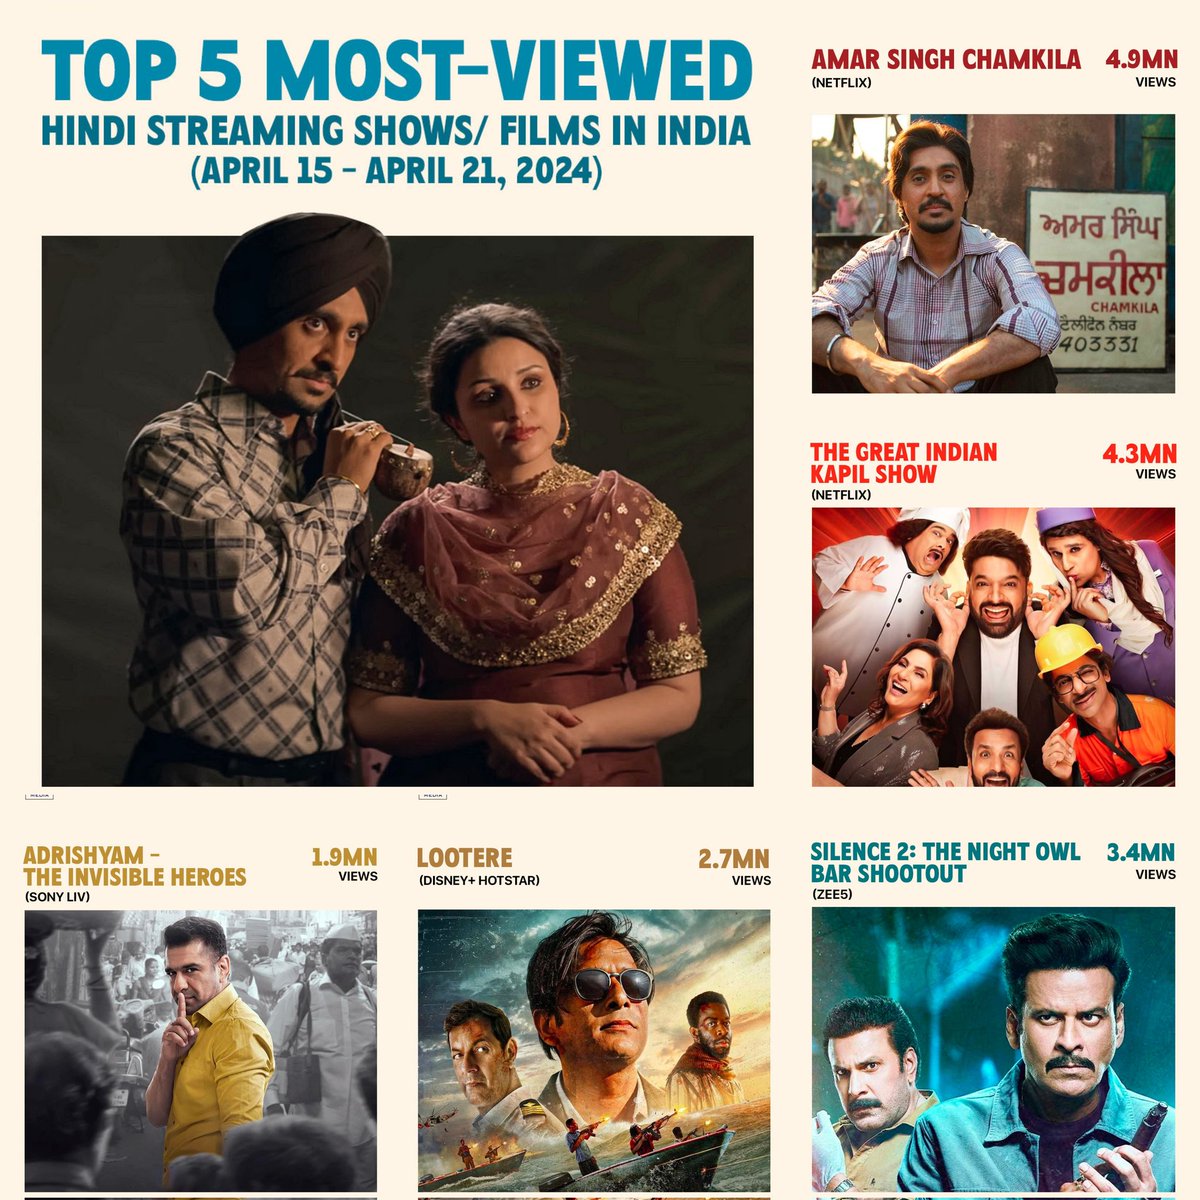 From 'Chamkila' to 'The Great Indian Kapil Show', here's a list of the most-viewed shows and movies from the Indian streaming space of last week. In collaboration with @OrmaxMedia #FilmCompanion